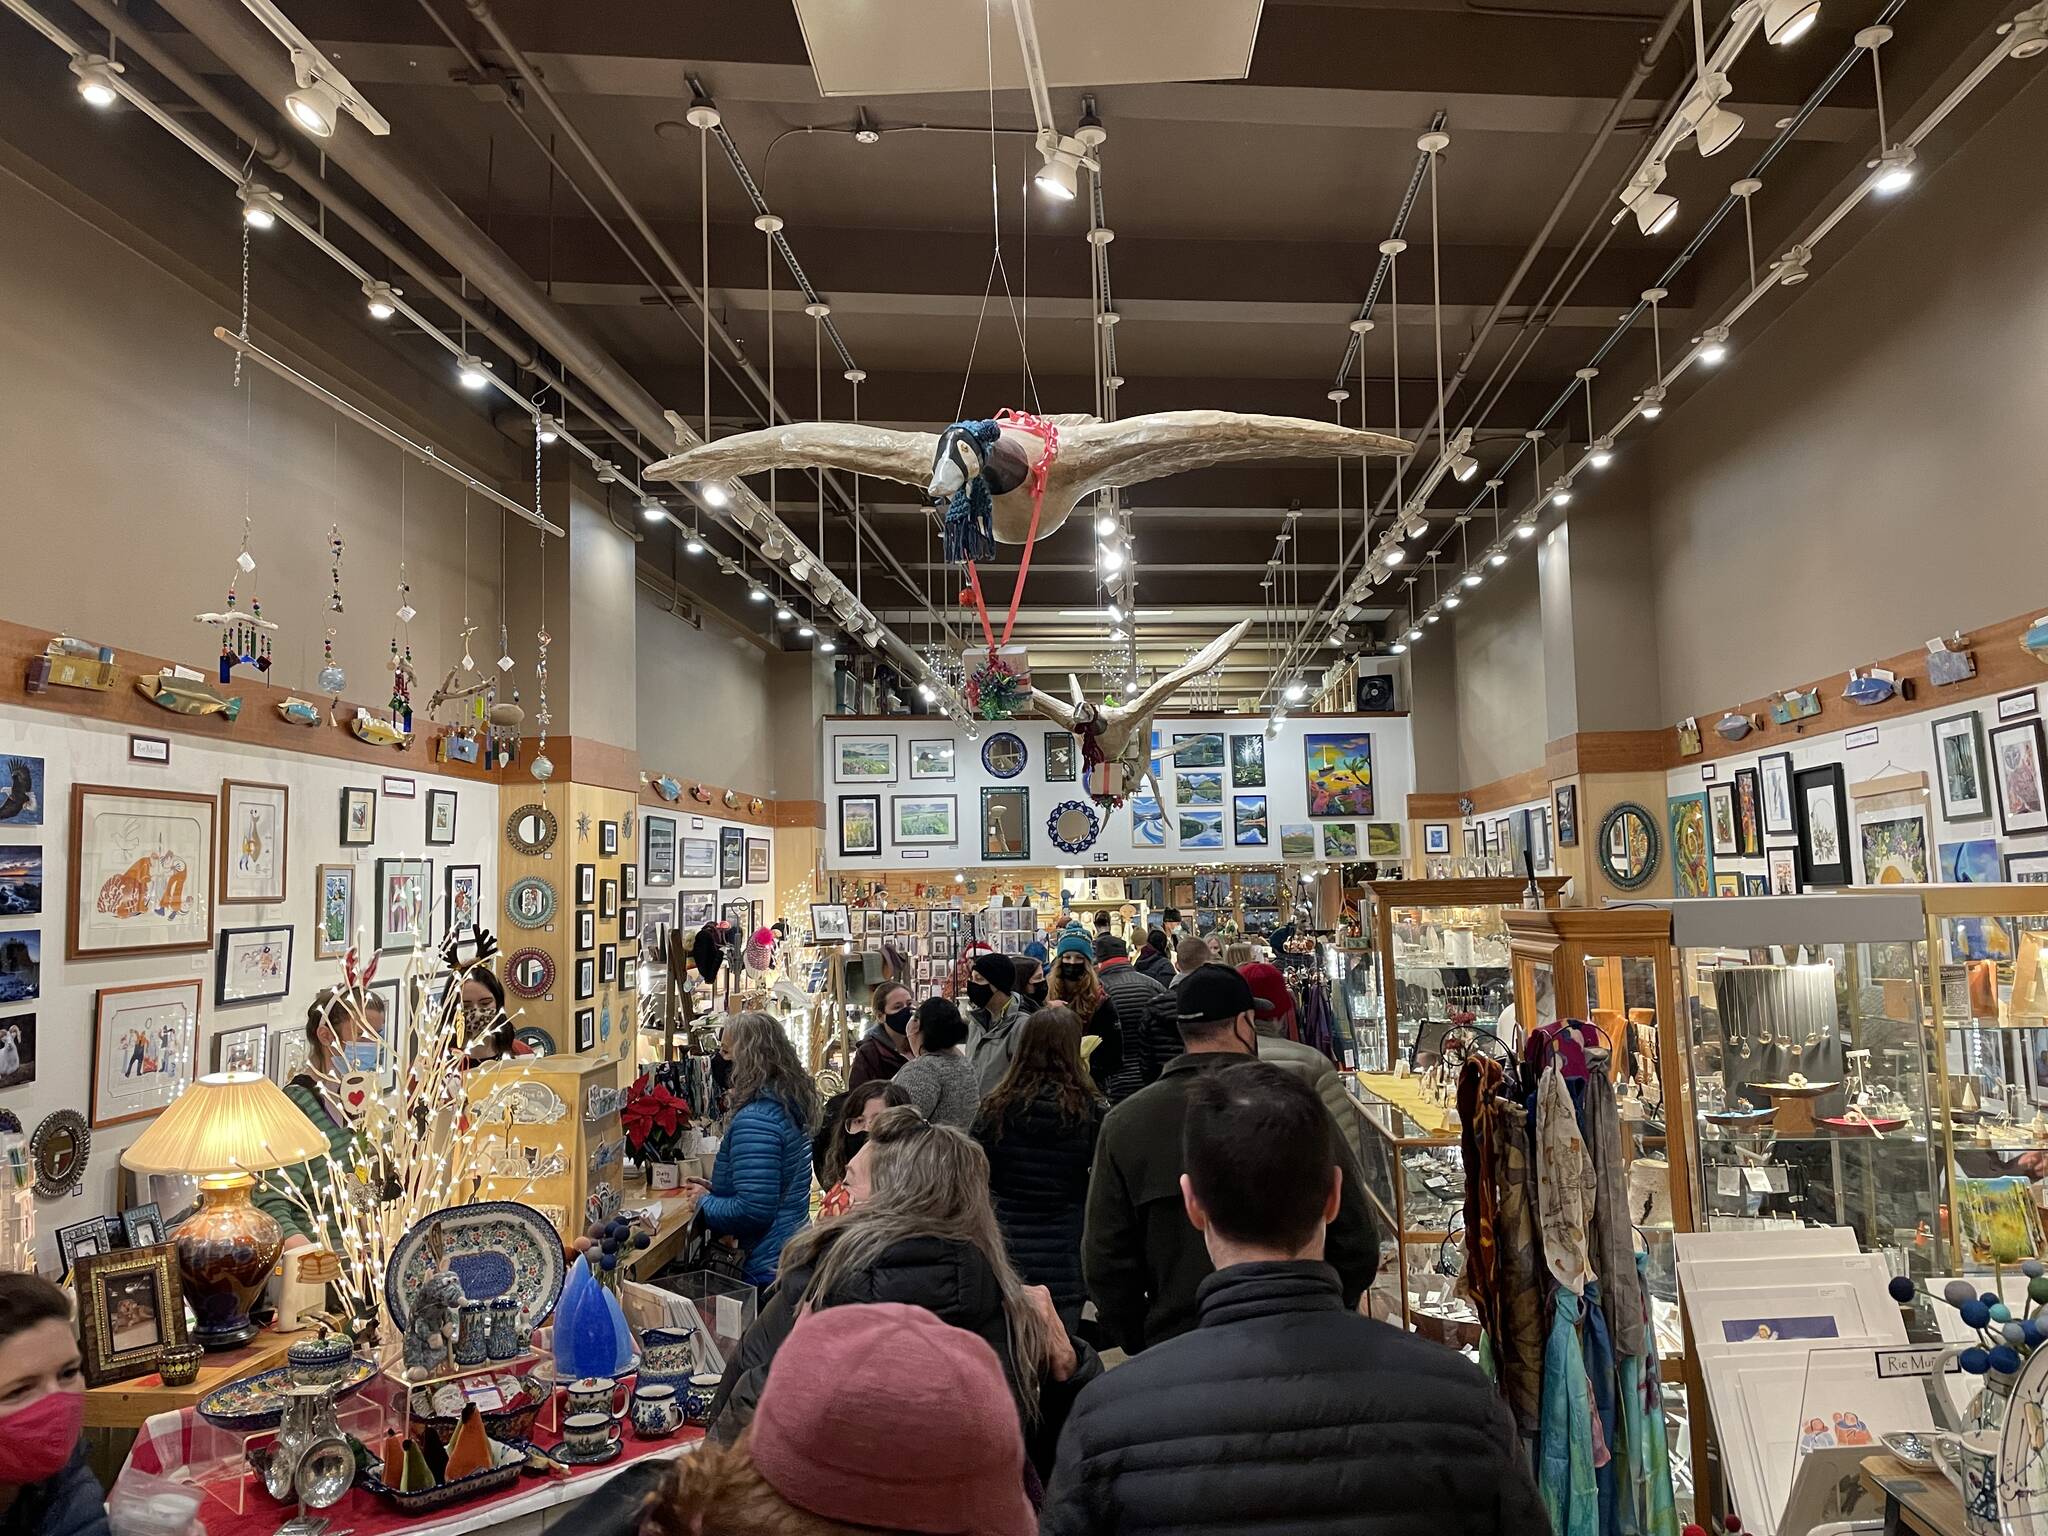 Shoppers peruse the selection at Annie Kaill’s during Gallery Walk on Dec. 3, 2021. (Michael S. Lockett / Juneau Empire)